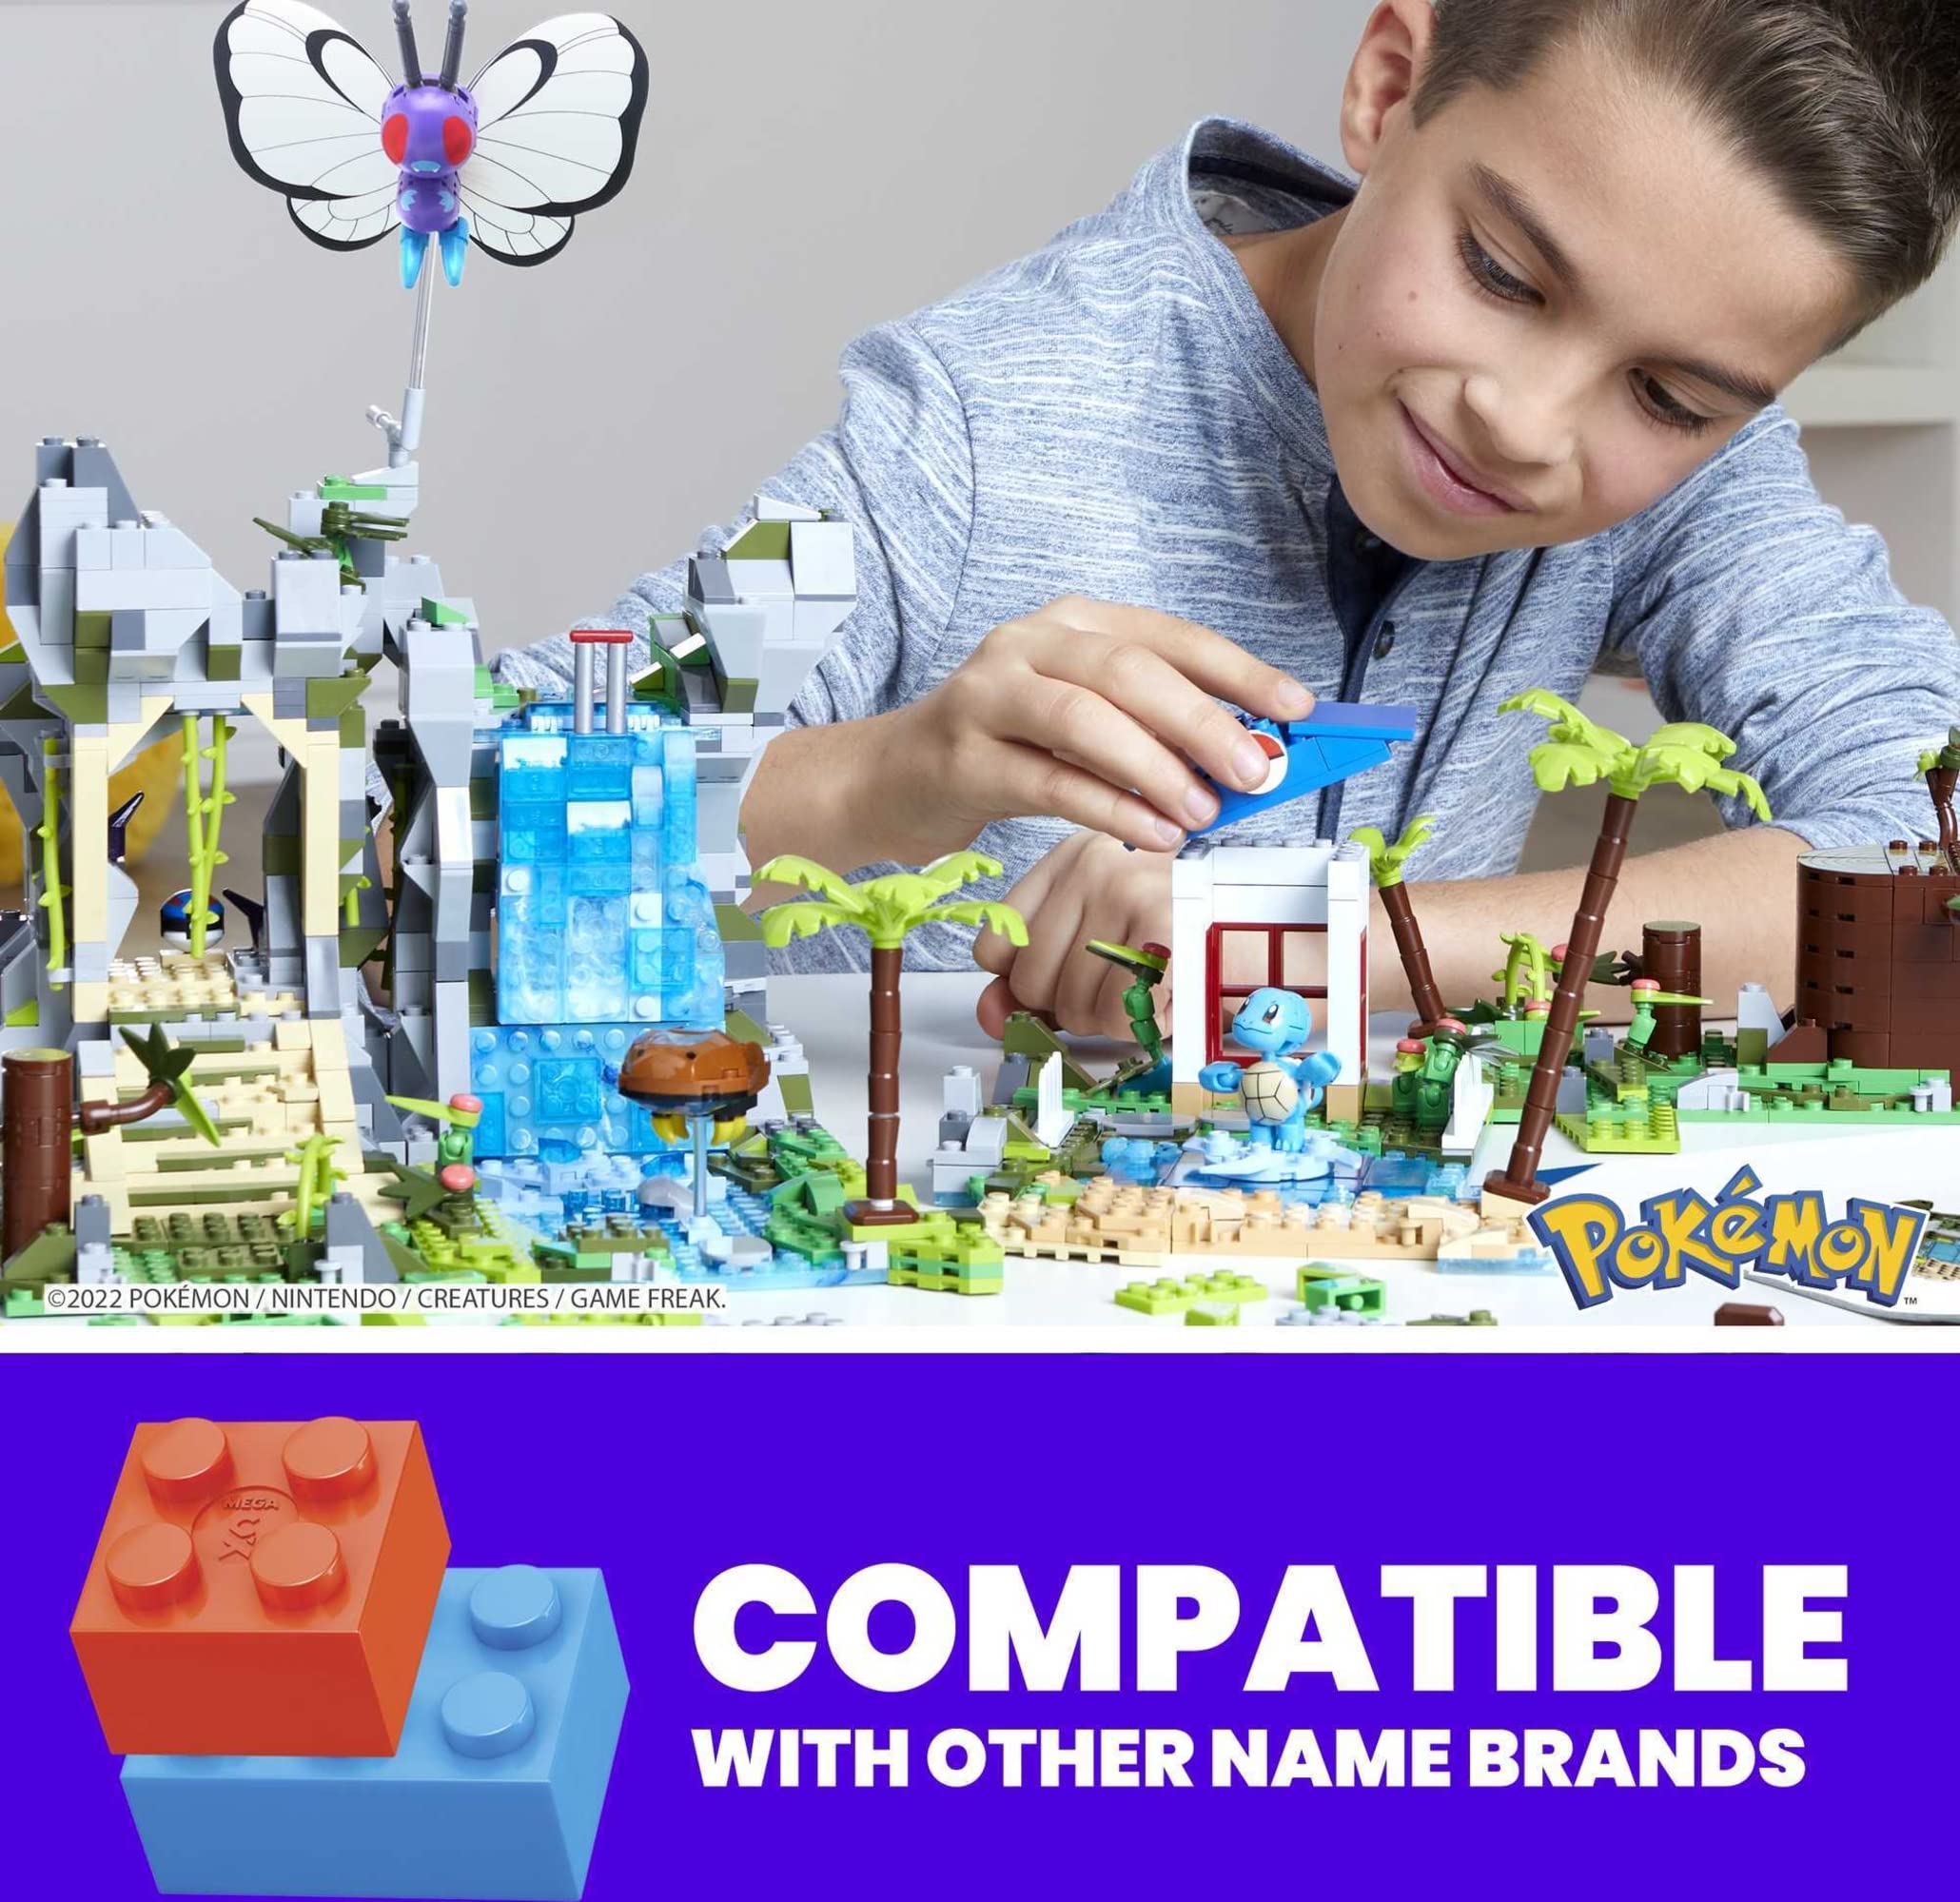 MEGA Pokemon Action Figure Building Toys for Kids, Jungle Voyage with 1362 Pieces, 4 Poseable Characters, Age 7+ Years Old Gift Idea (Amazon Exclusive)